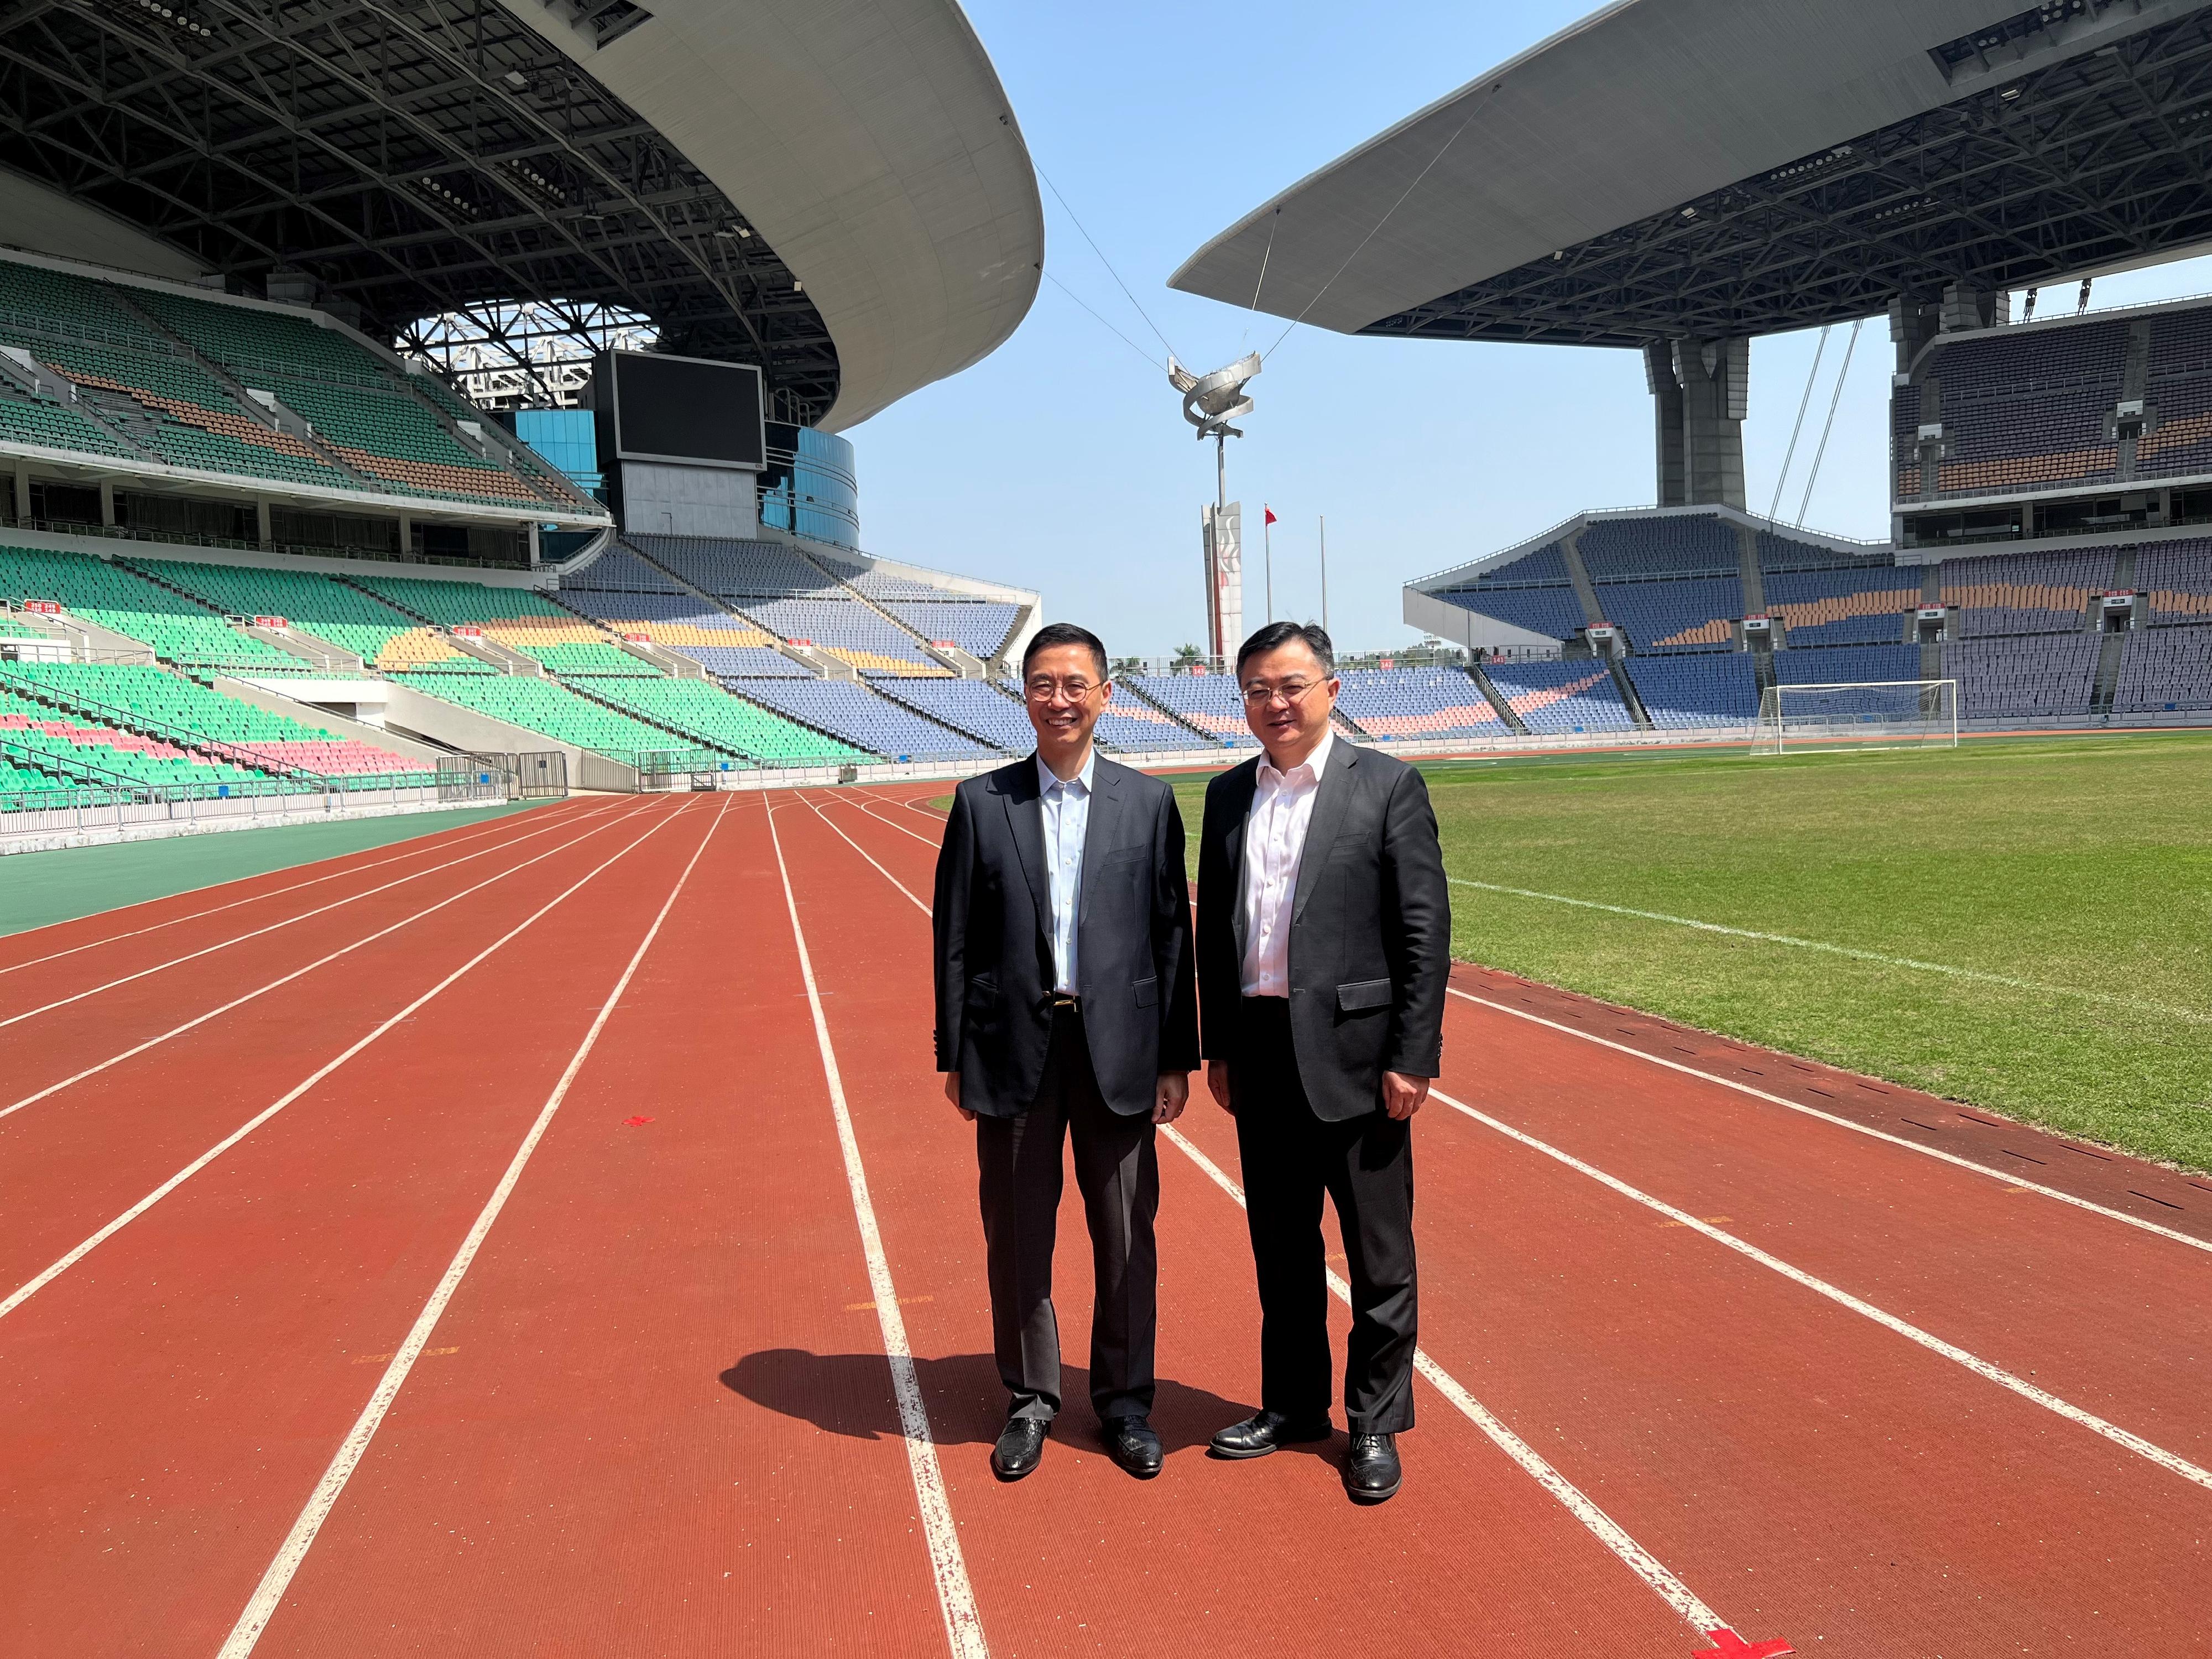 The Secretary for Culture, Sports and Tourism, Mr Kevin Yeung (left), today (March 20) meets with the Head of the Sports Bureau of Guangdong Province, Mr Cui Jian (right), in Guangzhou and visits the Guangdong Olympic Sports Center to know more about the operation and management of the Center and subsidiary facilities.